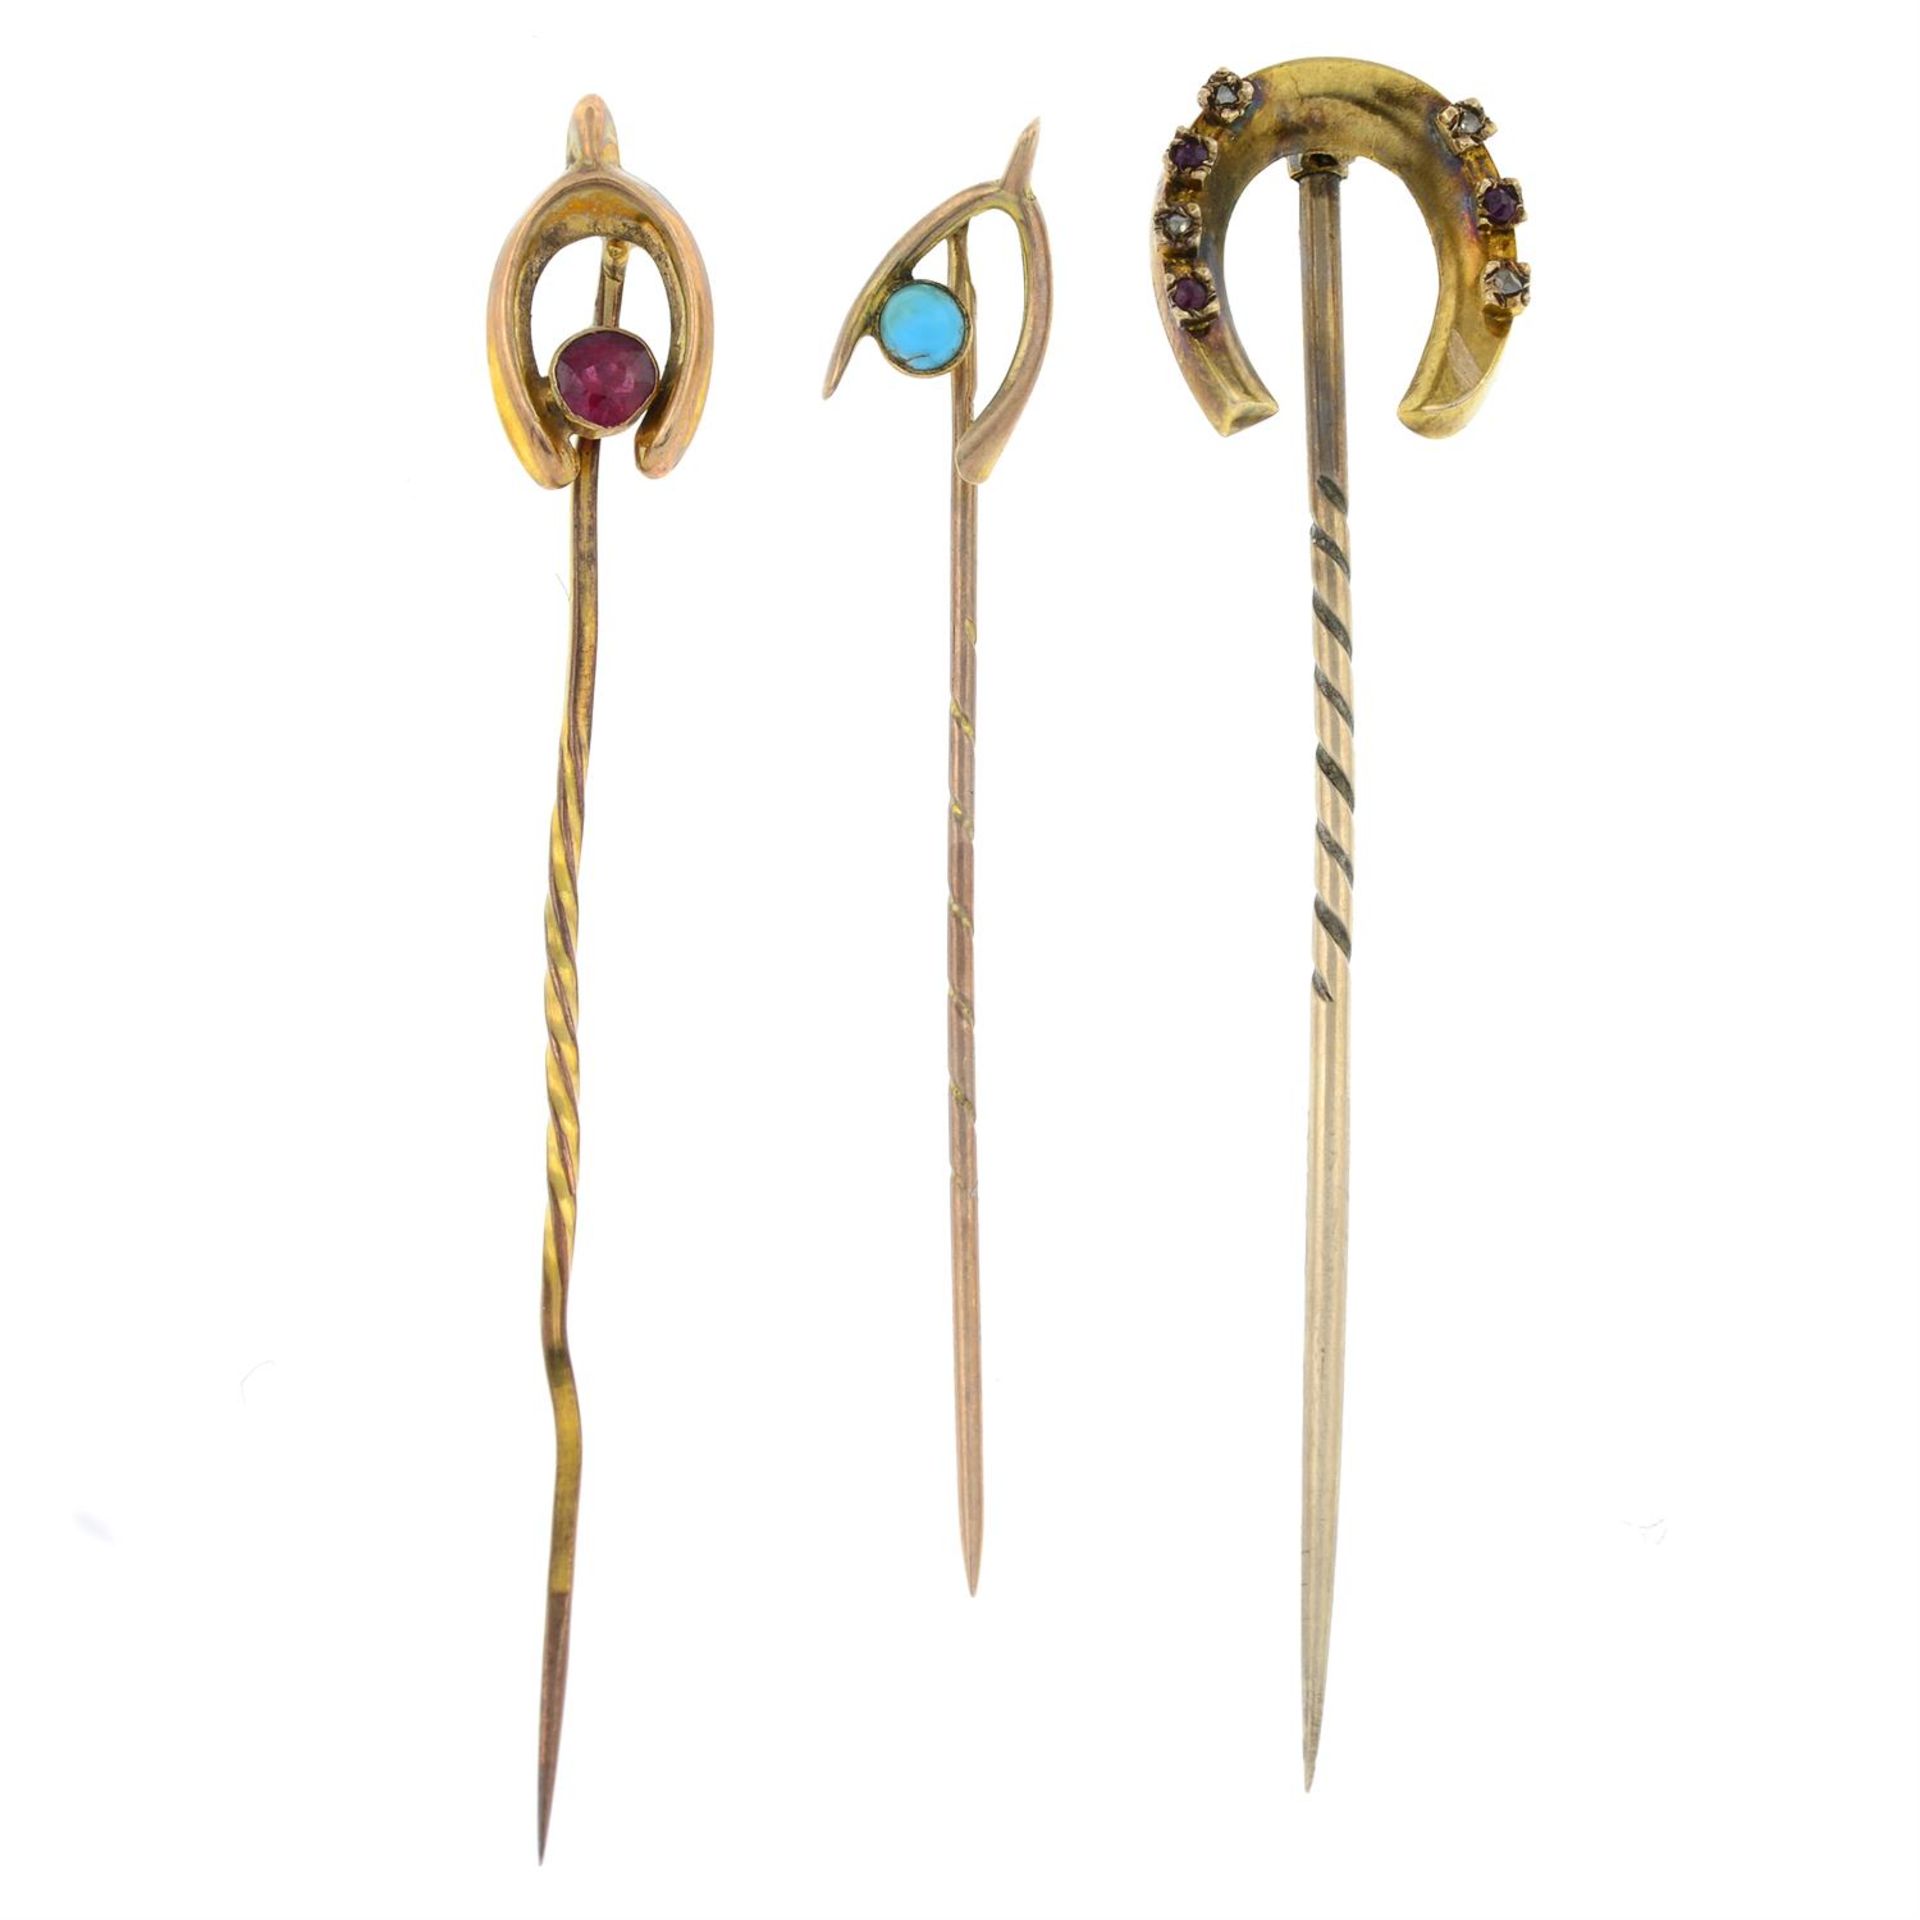 Three early 20th century gold stick pins.